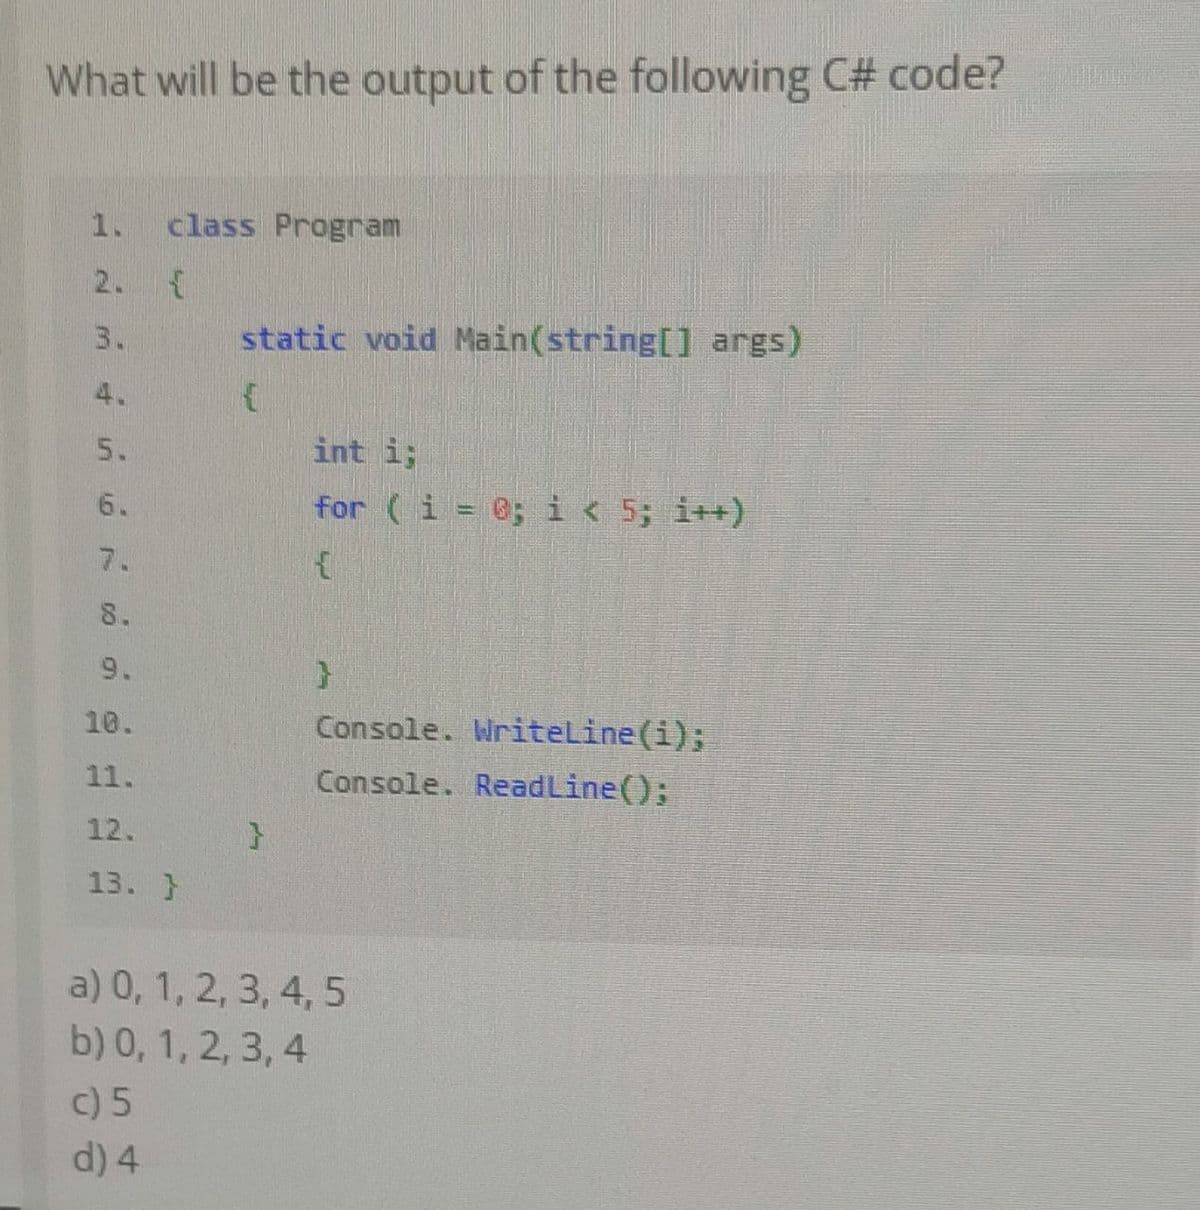 What will be the output of the following C# code?
1. class Program
2. {
29
5.
8.
9.
10.
11.
12.
13. }
static void Main(string[] args)
c) 5
d) 4
int i;
for (i = 0; i < 5; i++)
{
}
Console. WriteLine(i);
Console. Read Line();
a) 0, 1, 2, 3, 4, 5
b) 0, 1, 2, 3, 4